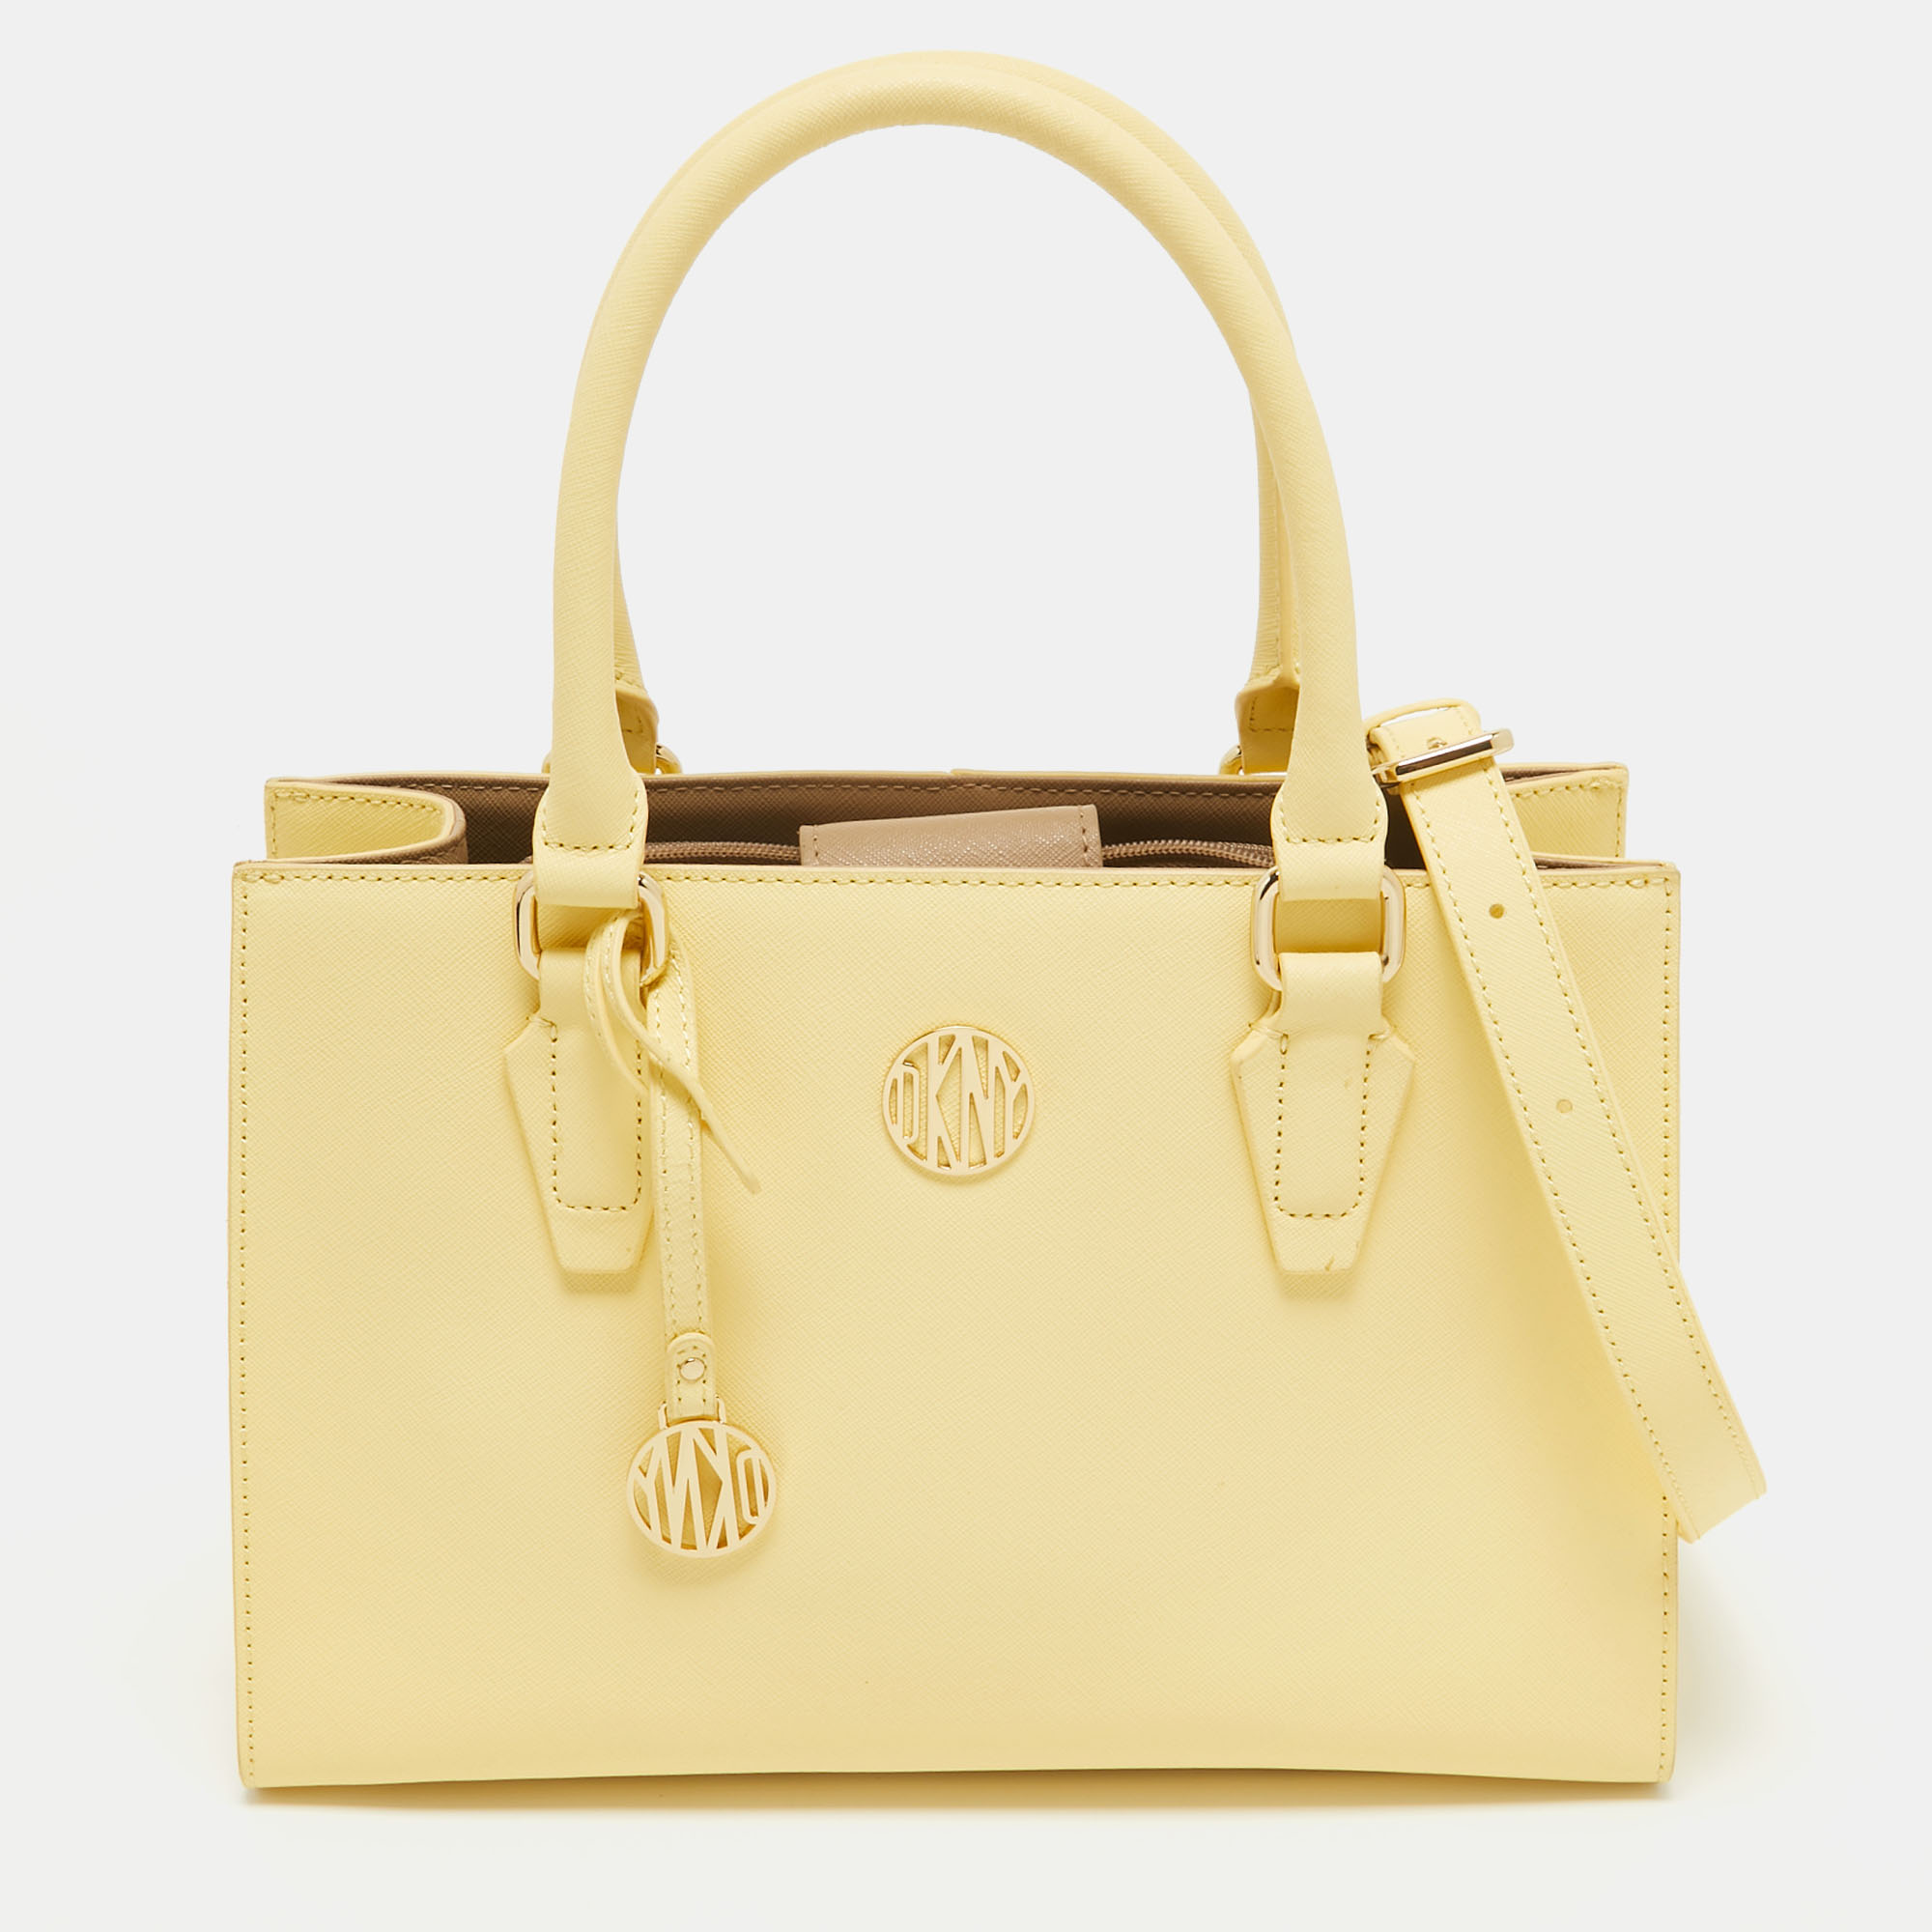 Dkny Yellow Leather Tote